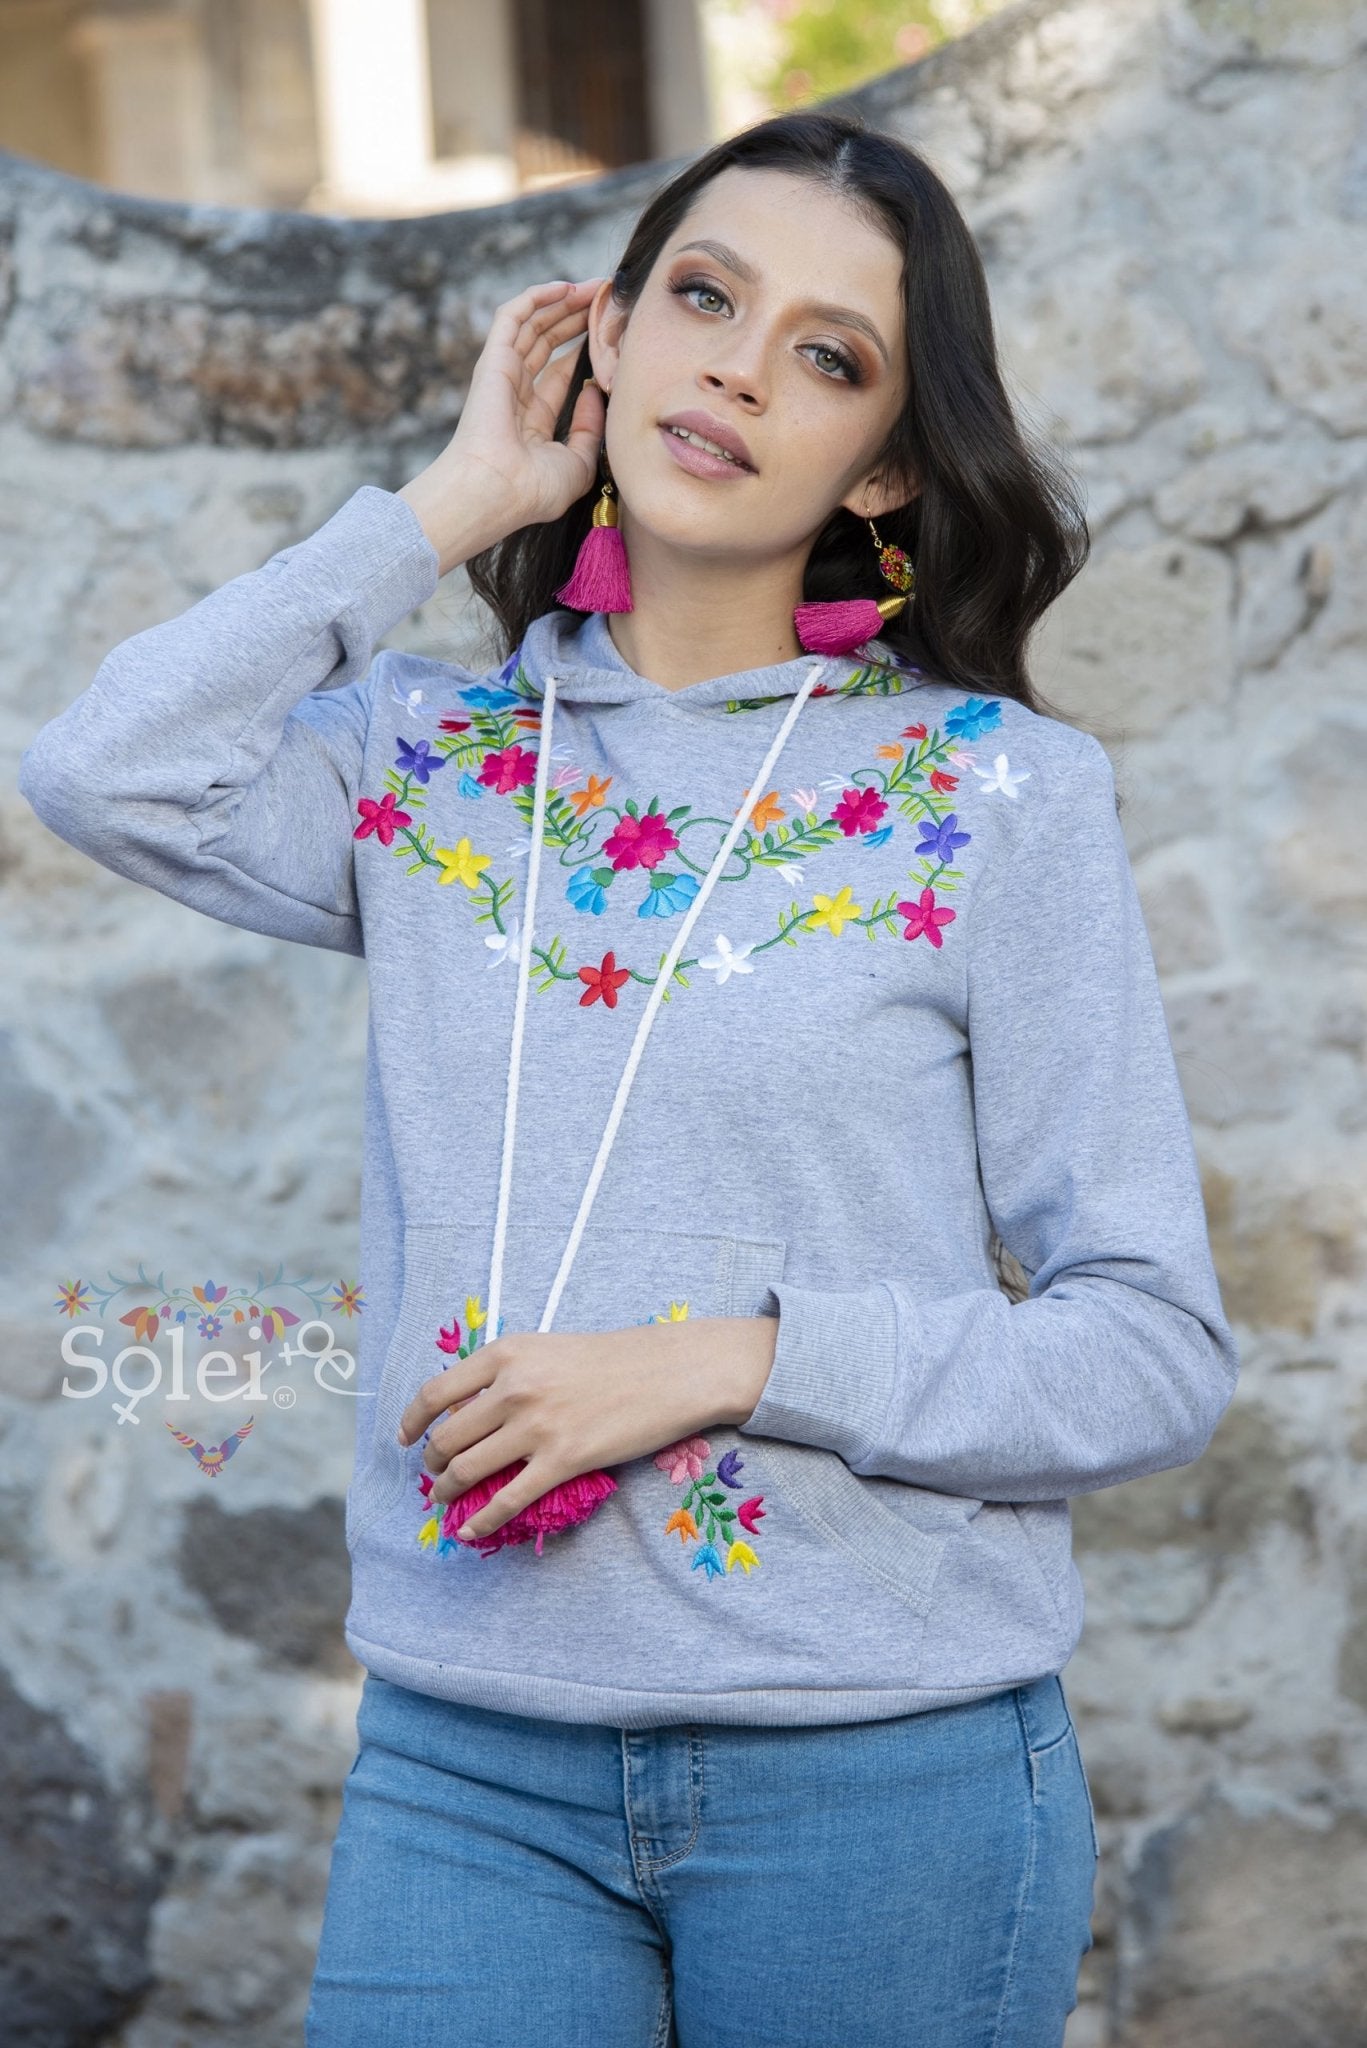 Brenda Hand embroidered floral Mexican design hoodie + Face mask included - Solei Store